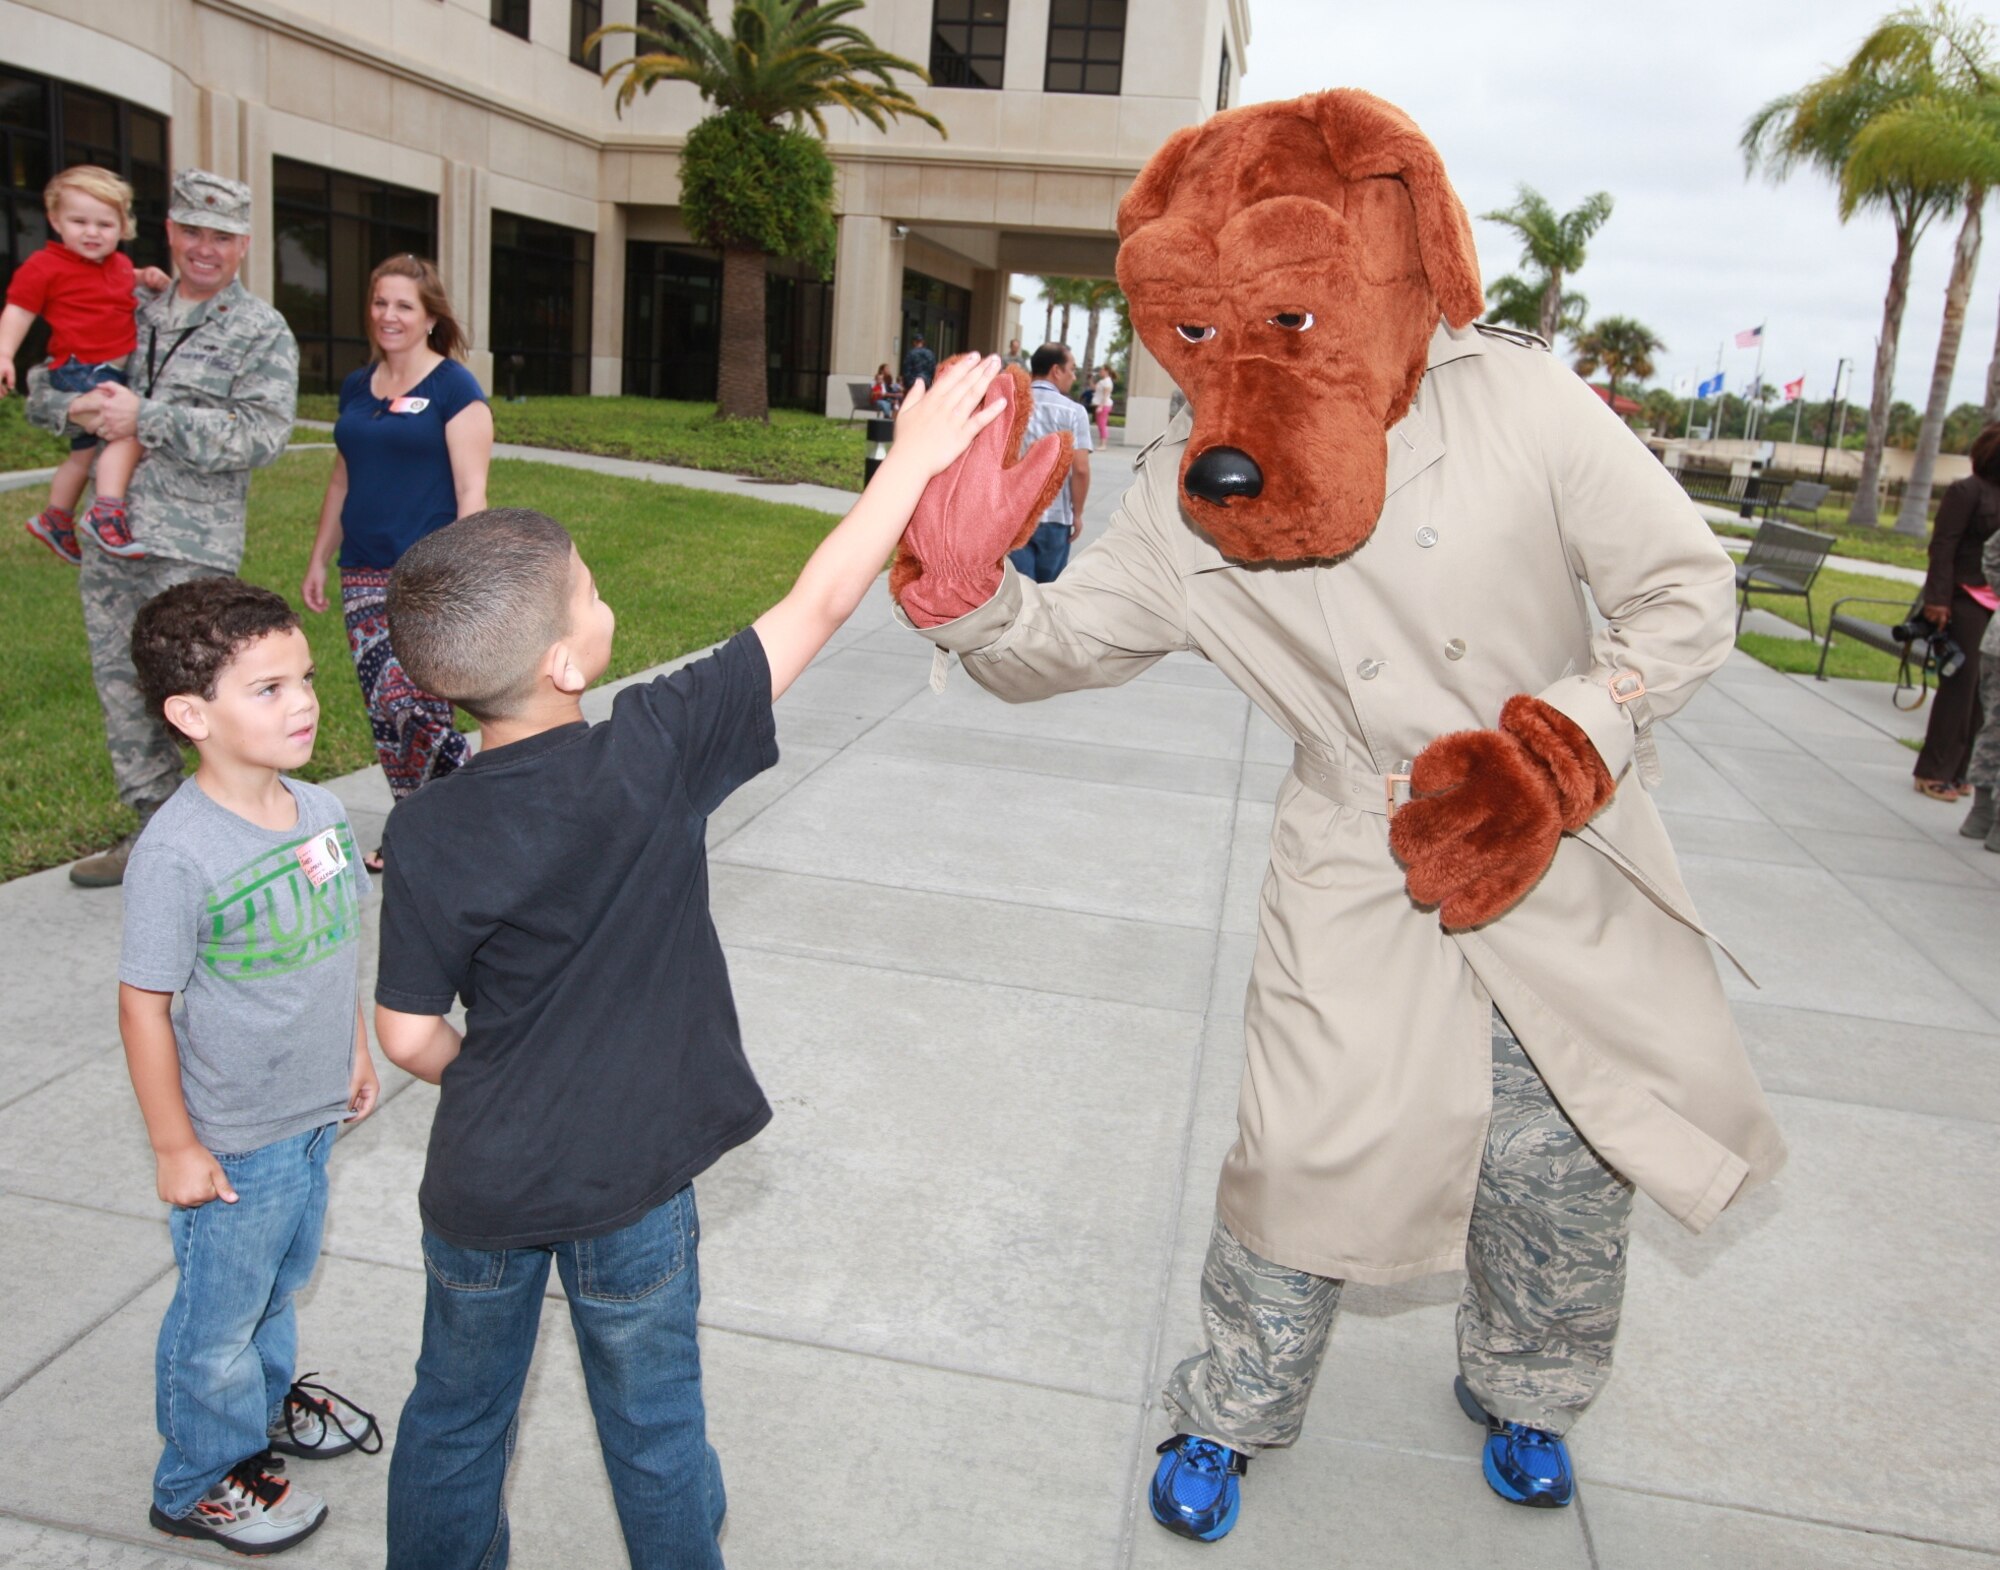 Trent, son of Sgt. Fredrick J. Coleman, U.S. Central Command public affairs, slaps a high-five to McGruff the Crime Dog during the USCENTCOM’s Family Open House at MacDill Air Force Base, Fla., April 18. Good to see he’s still spreading the good word to stay away from drugs. (U.S. Marine Corps photo by Sgt. Fredrick J. Coleman/Released)